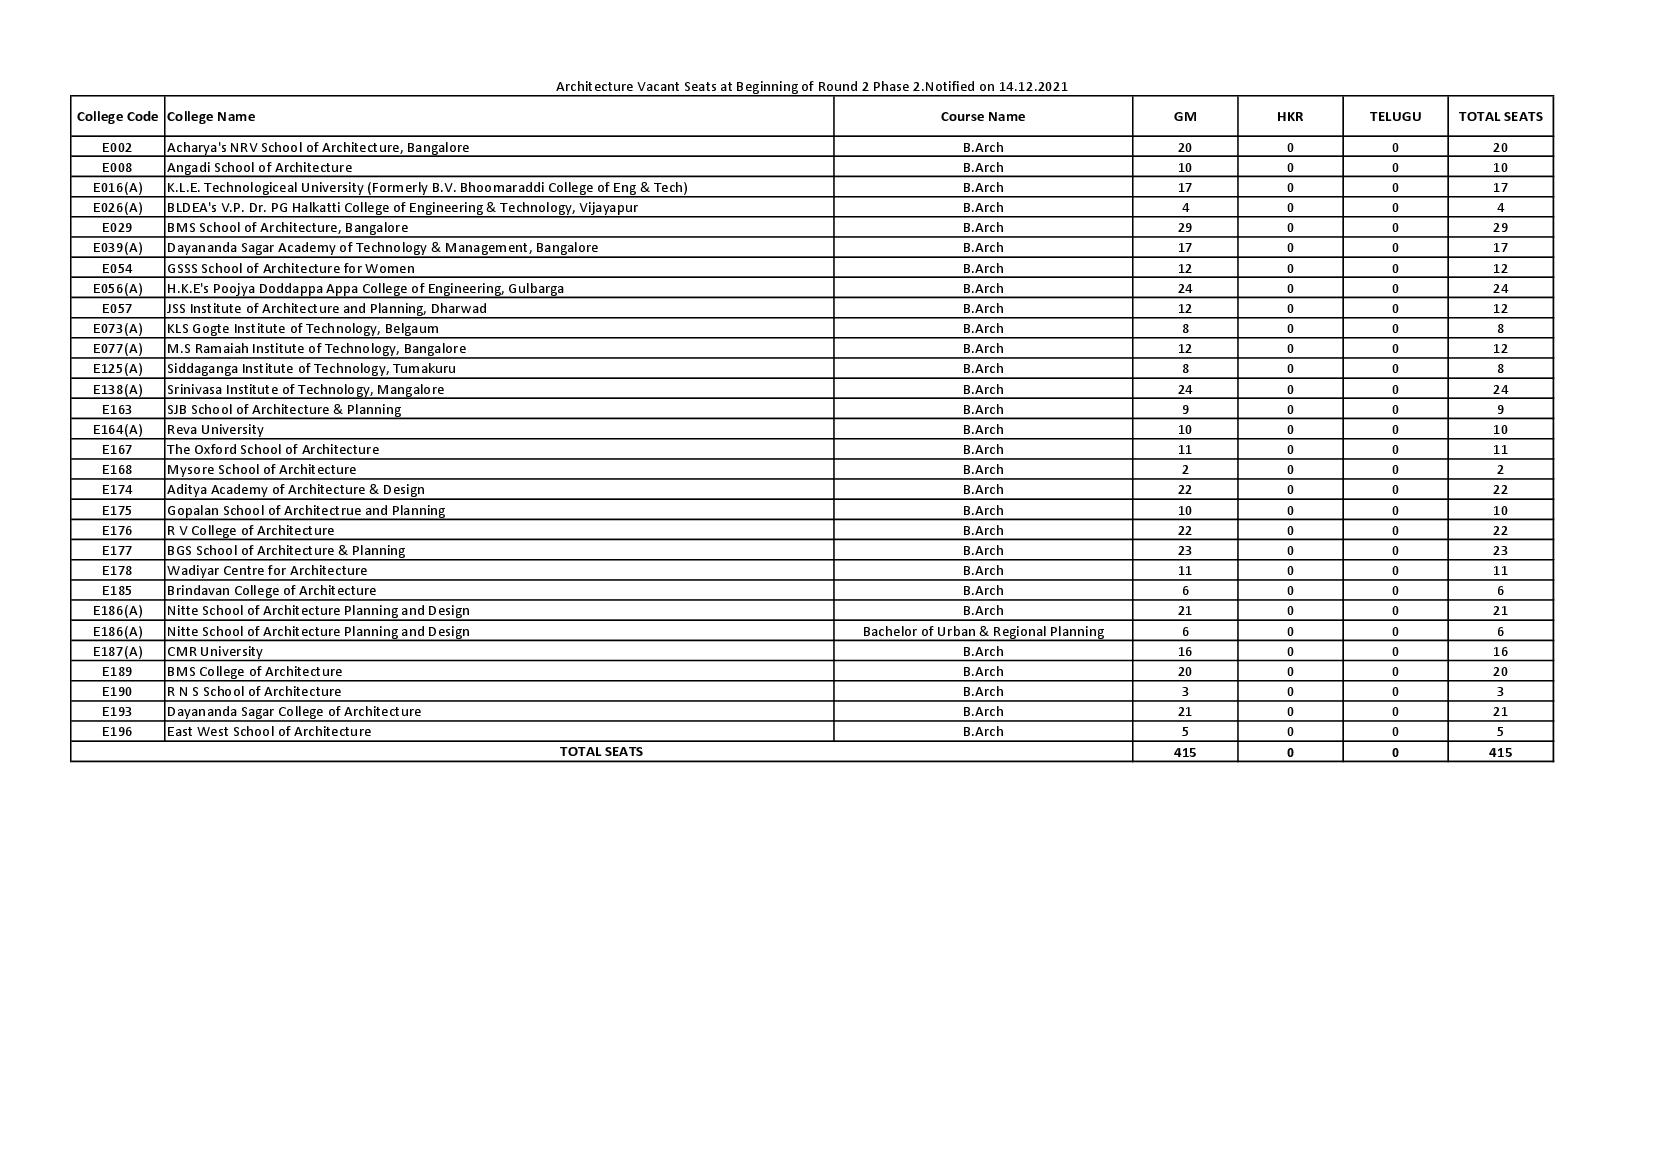 COMEDK 2021 Architecture Vacant seats at Beginning of Round 2, Phase 2 - Page 1